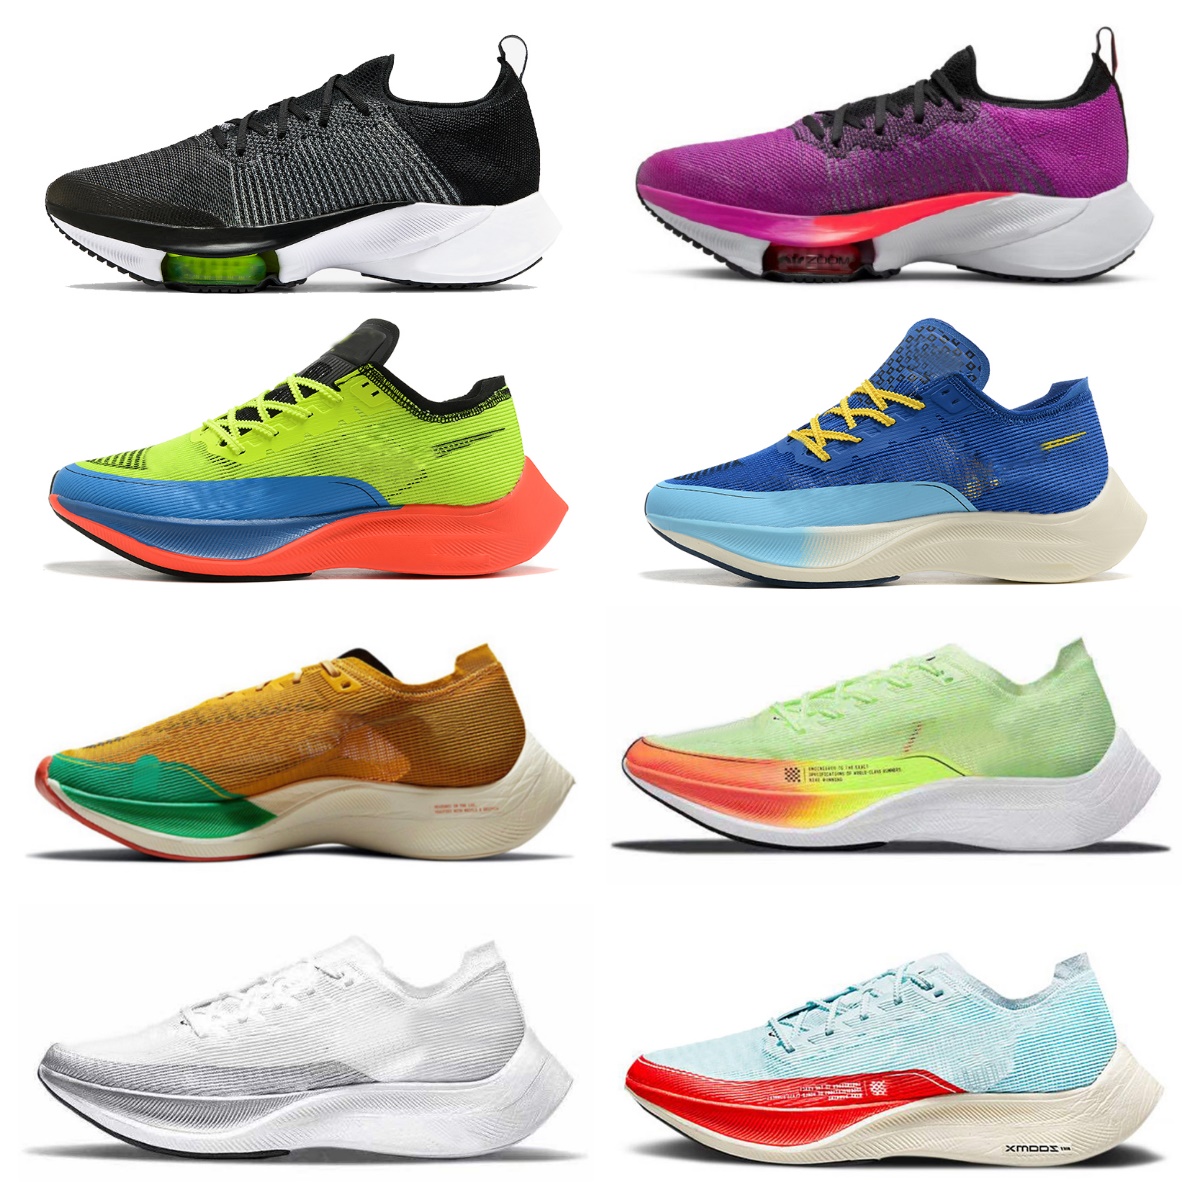 

NEW Zoomx Vaporfly Next% Running Shoes Steve Prefontaine Volt Dark Smoke Grey Tempo Fly knit Hyper Violet Crimson White Black Watermelon Blue Ribbon runners Sneakers, Bubble package bag